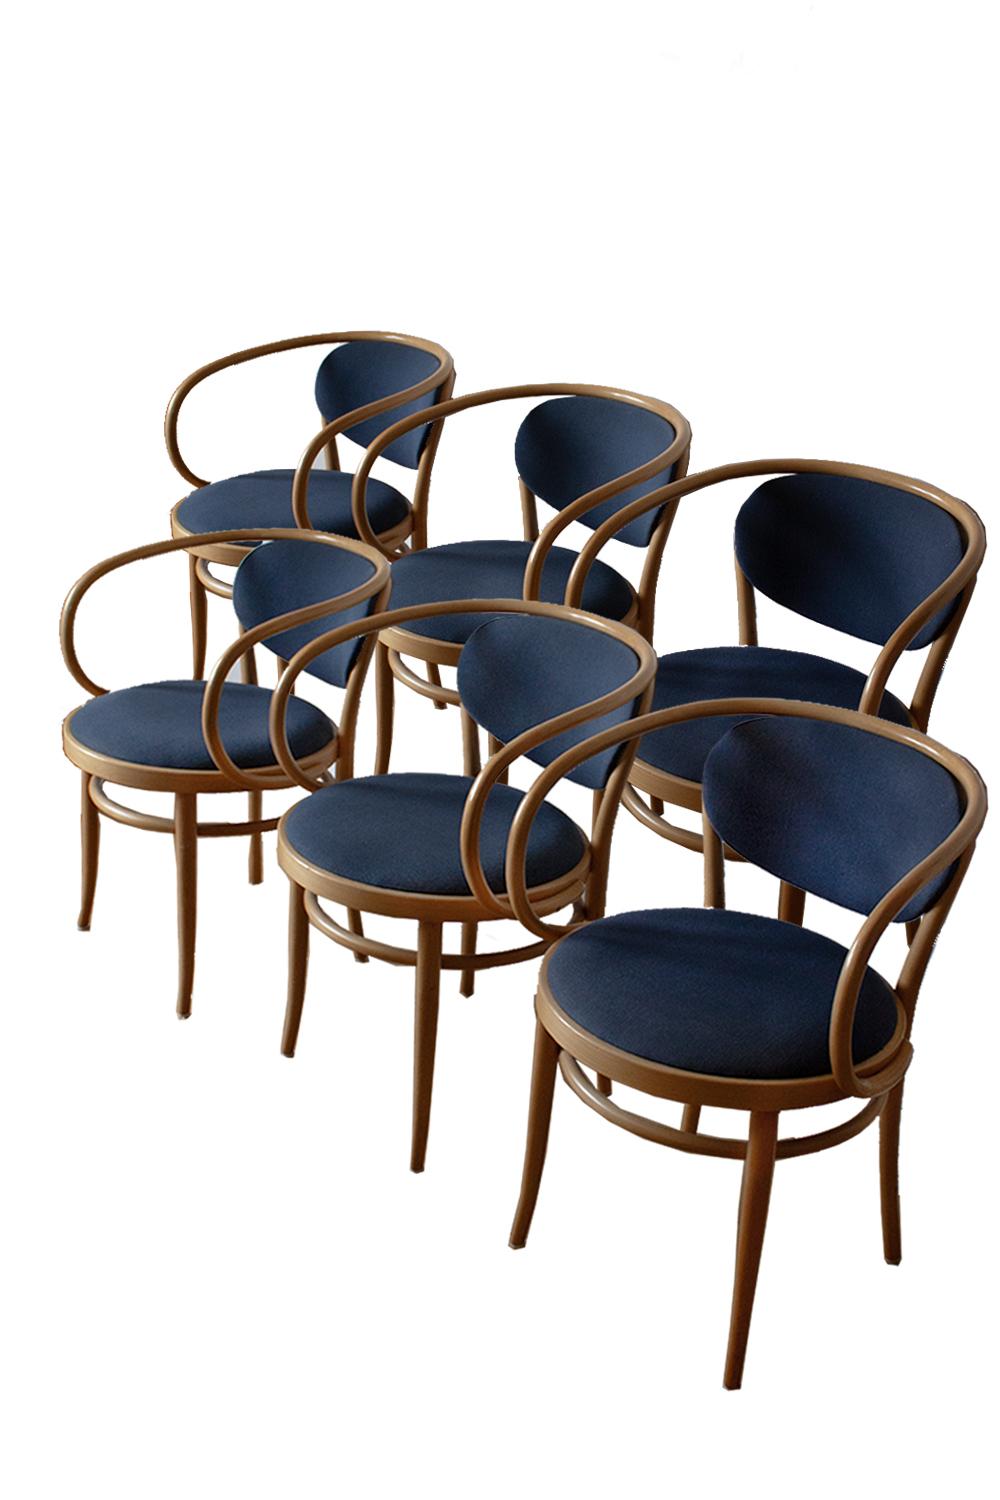 6 Original Thonet 209 Dining chairs with rare blue upholstery For Sale 6